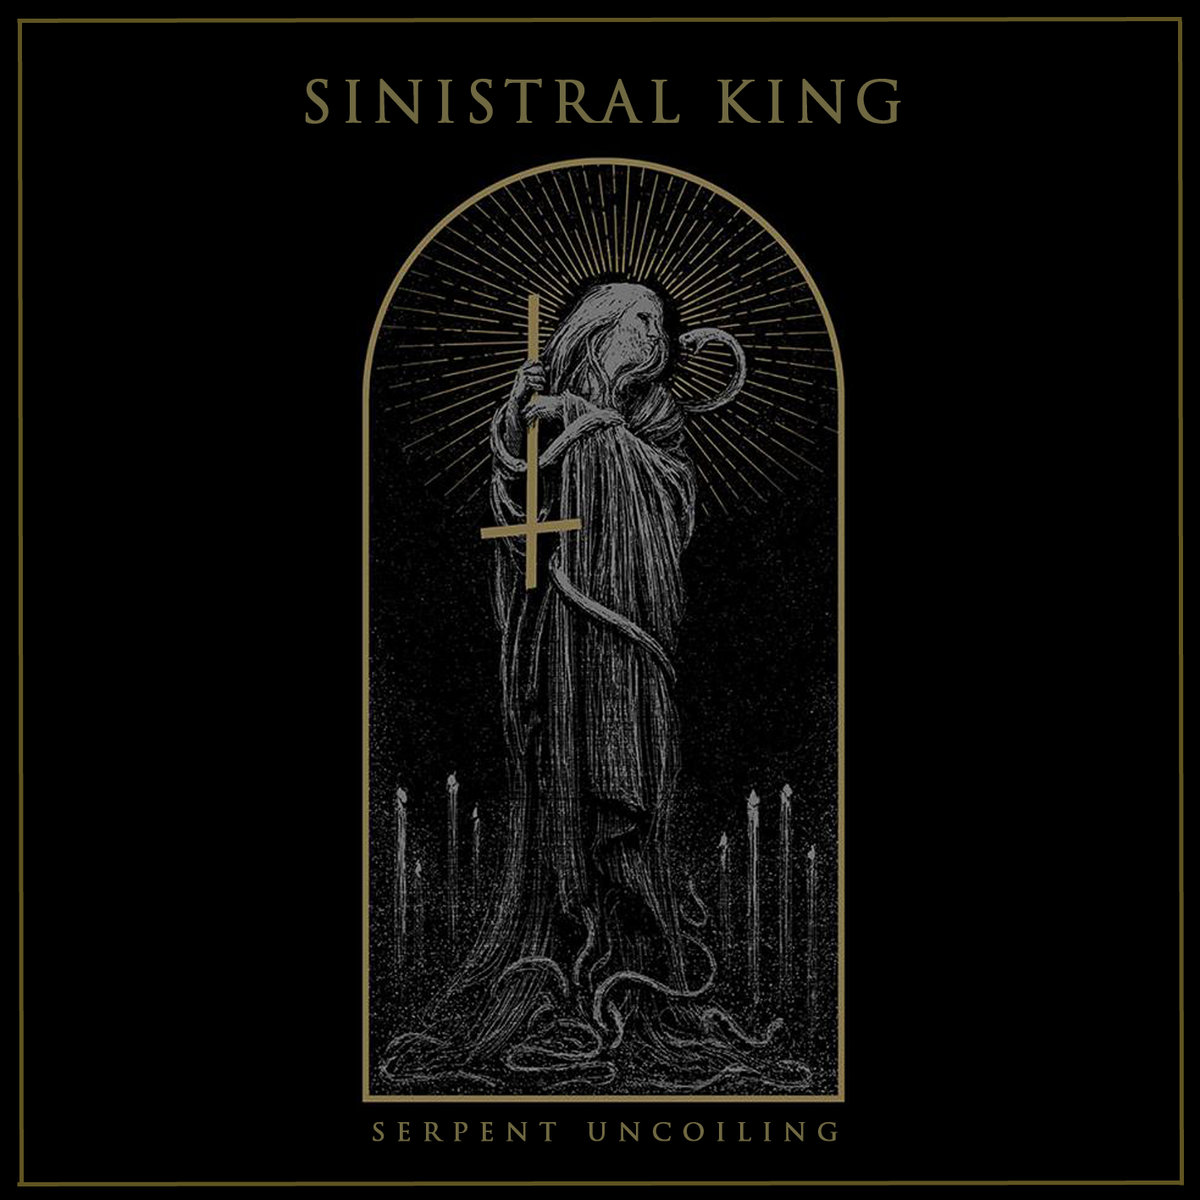 Serpent Uncoiling | SINISTRAL KING